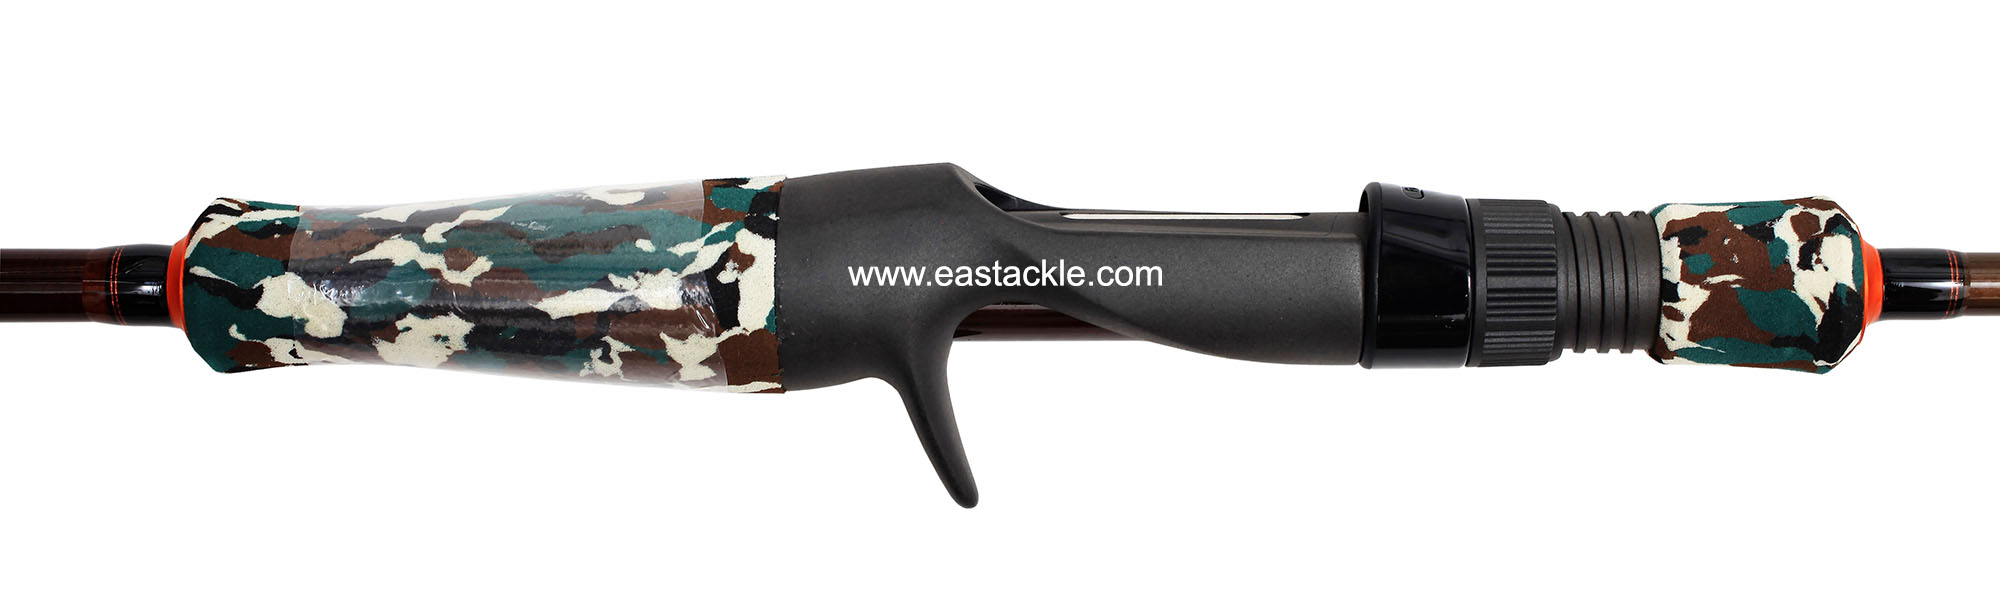 Storm - Discovery - DVC662MH - Bait Casting Rod - Reel Seat (Side View) | Eastackle